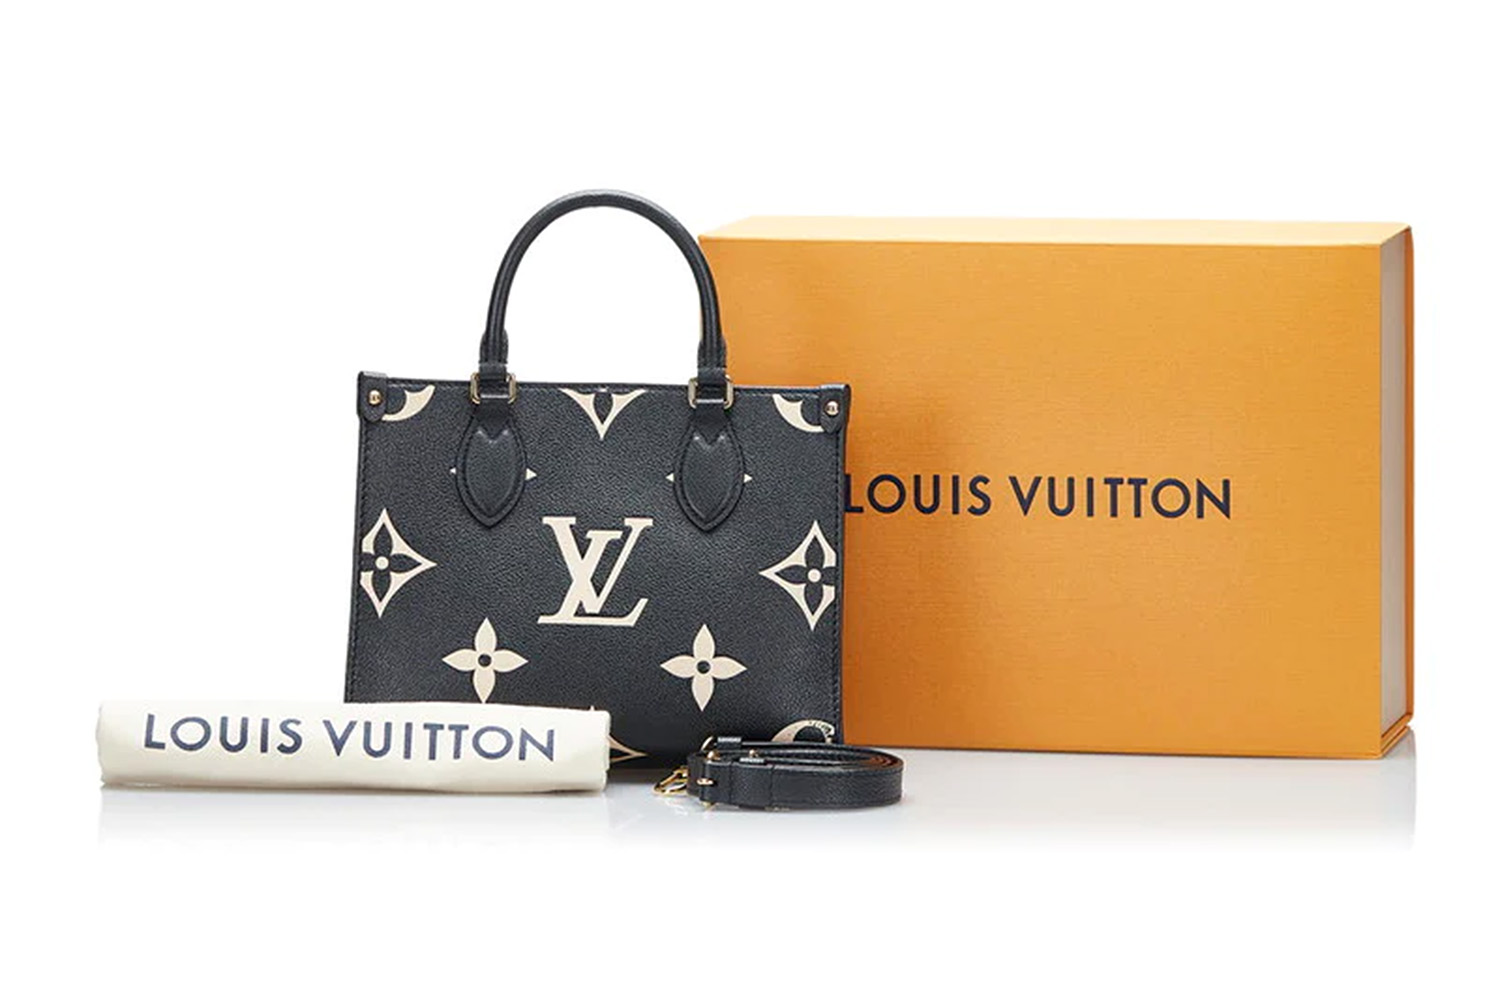 LV onthego small size with dust bag and box